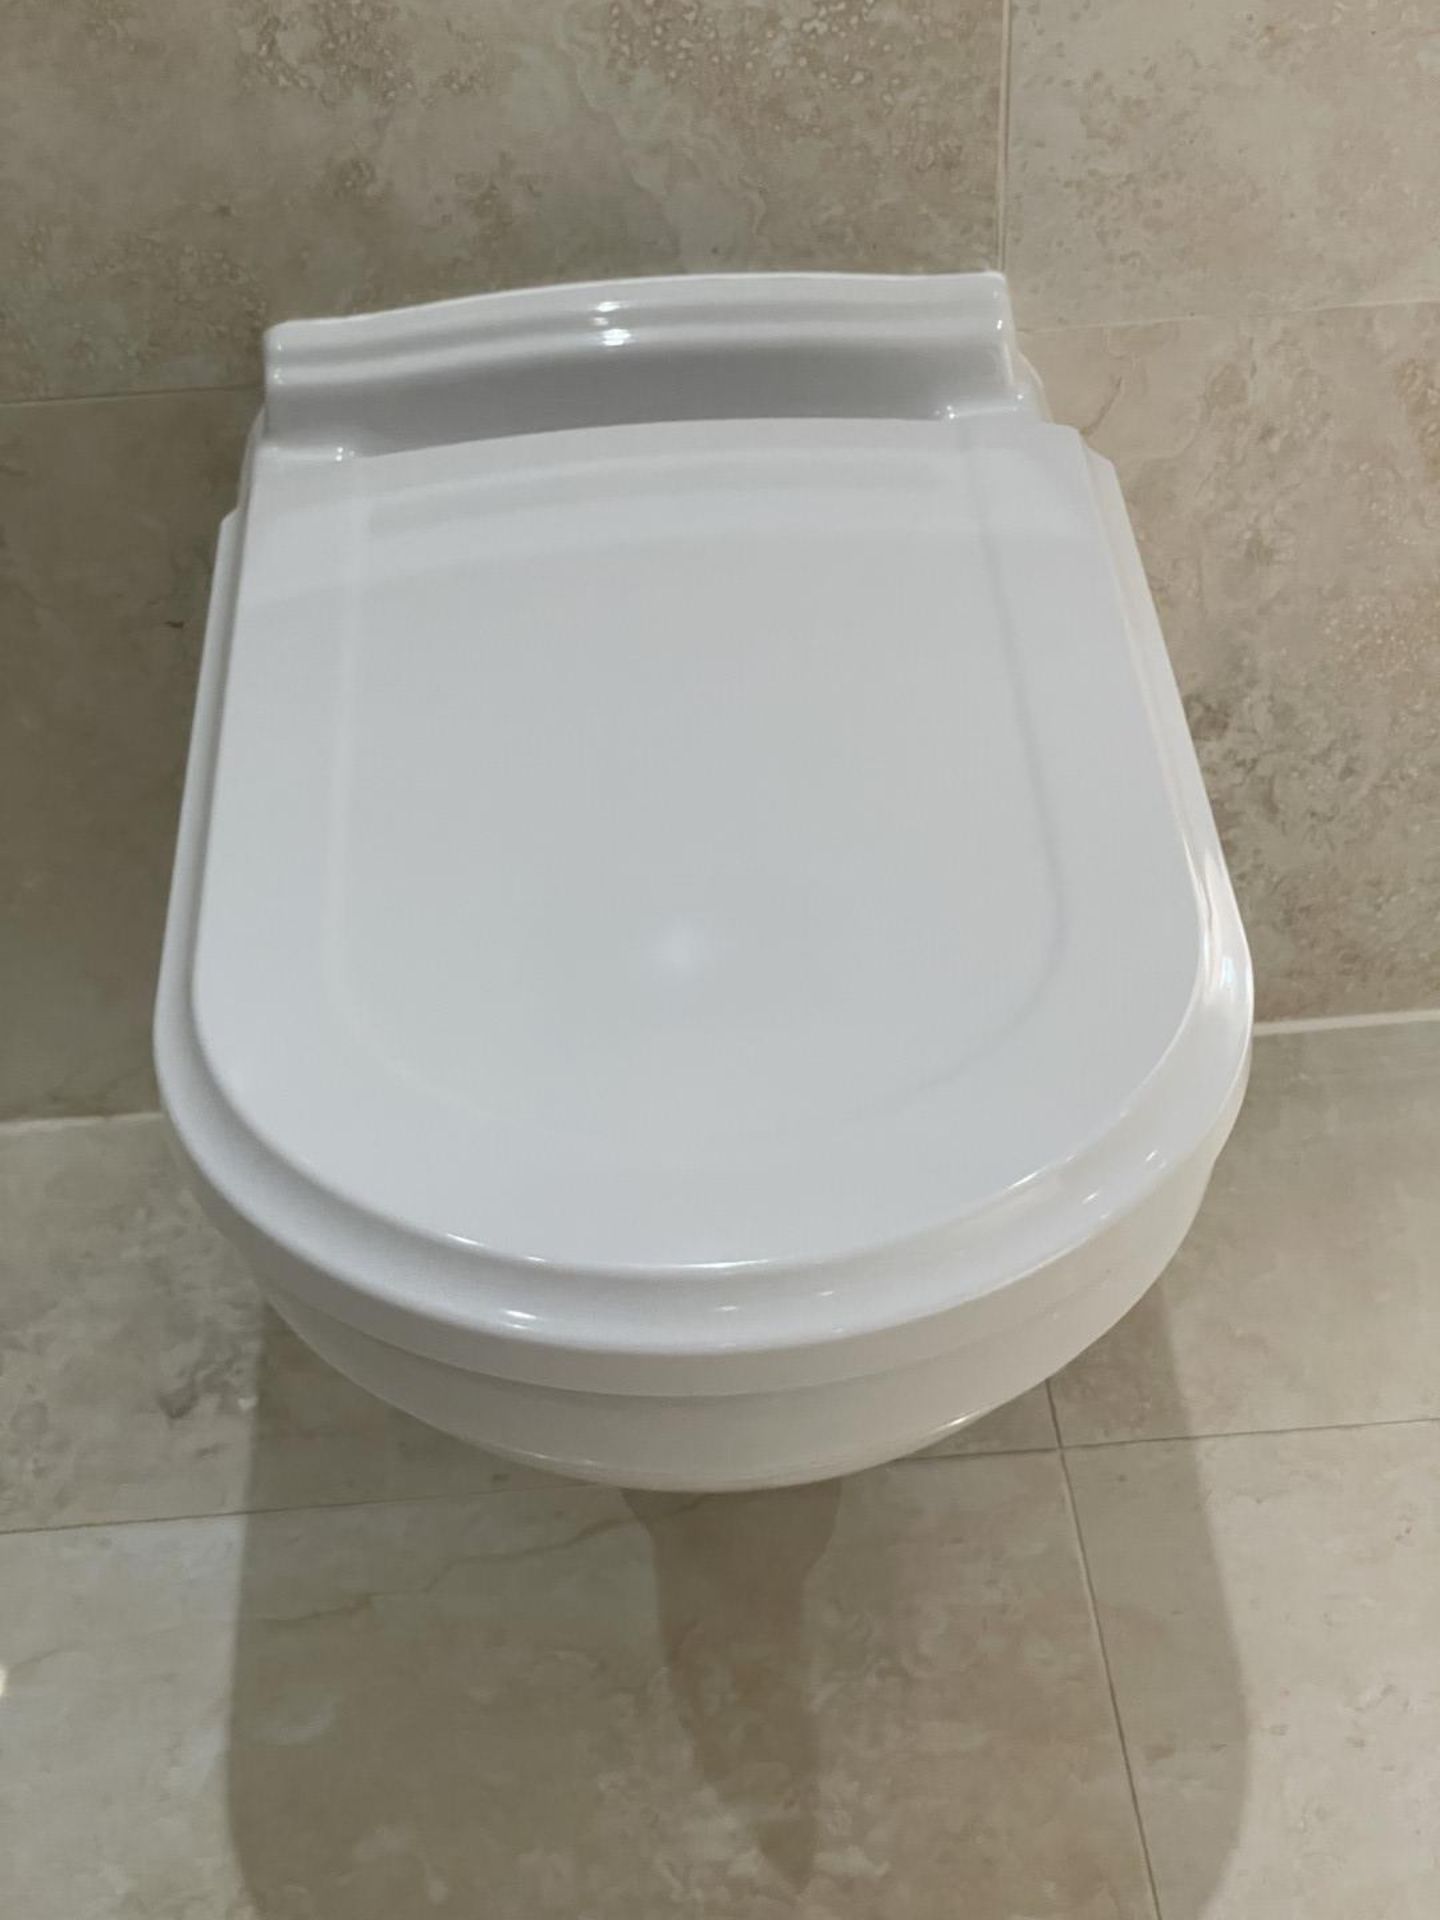 1 x VILLEROY & BOCH Wall Hung Toilet with Geberit Flush Plate - Ref: PAN231 - CL896 - NO VAT ON - Image 5 of 14